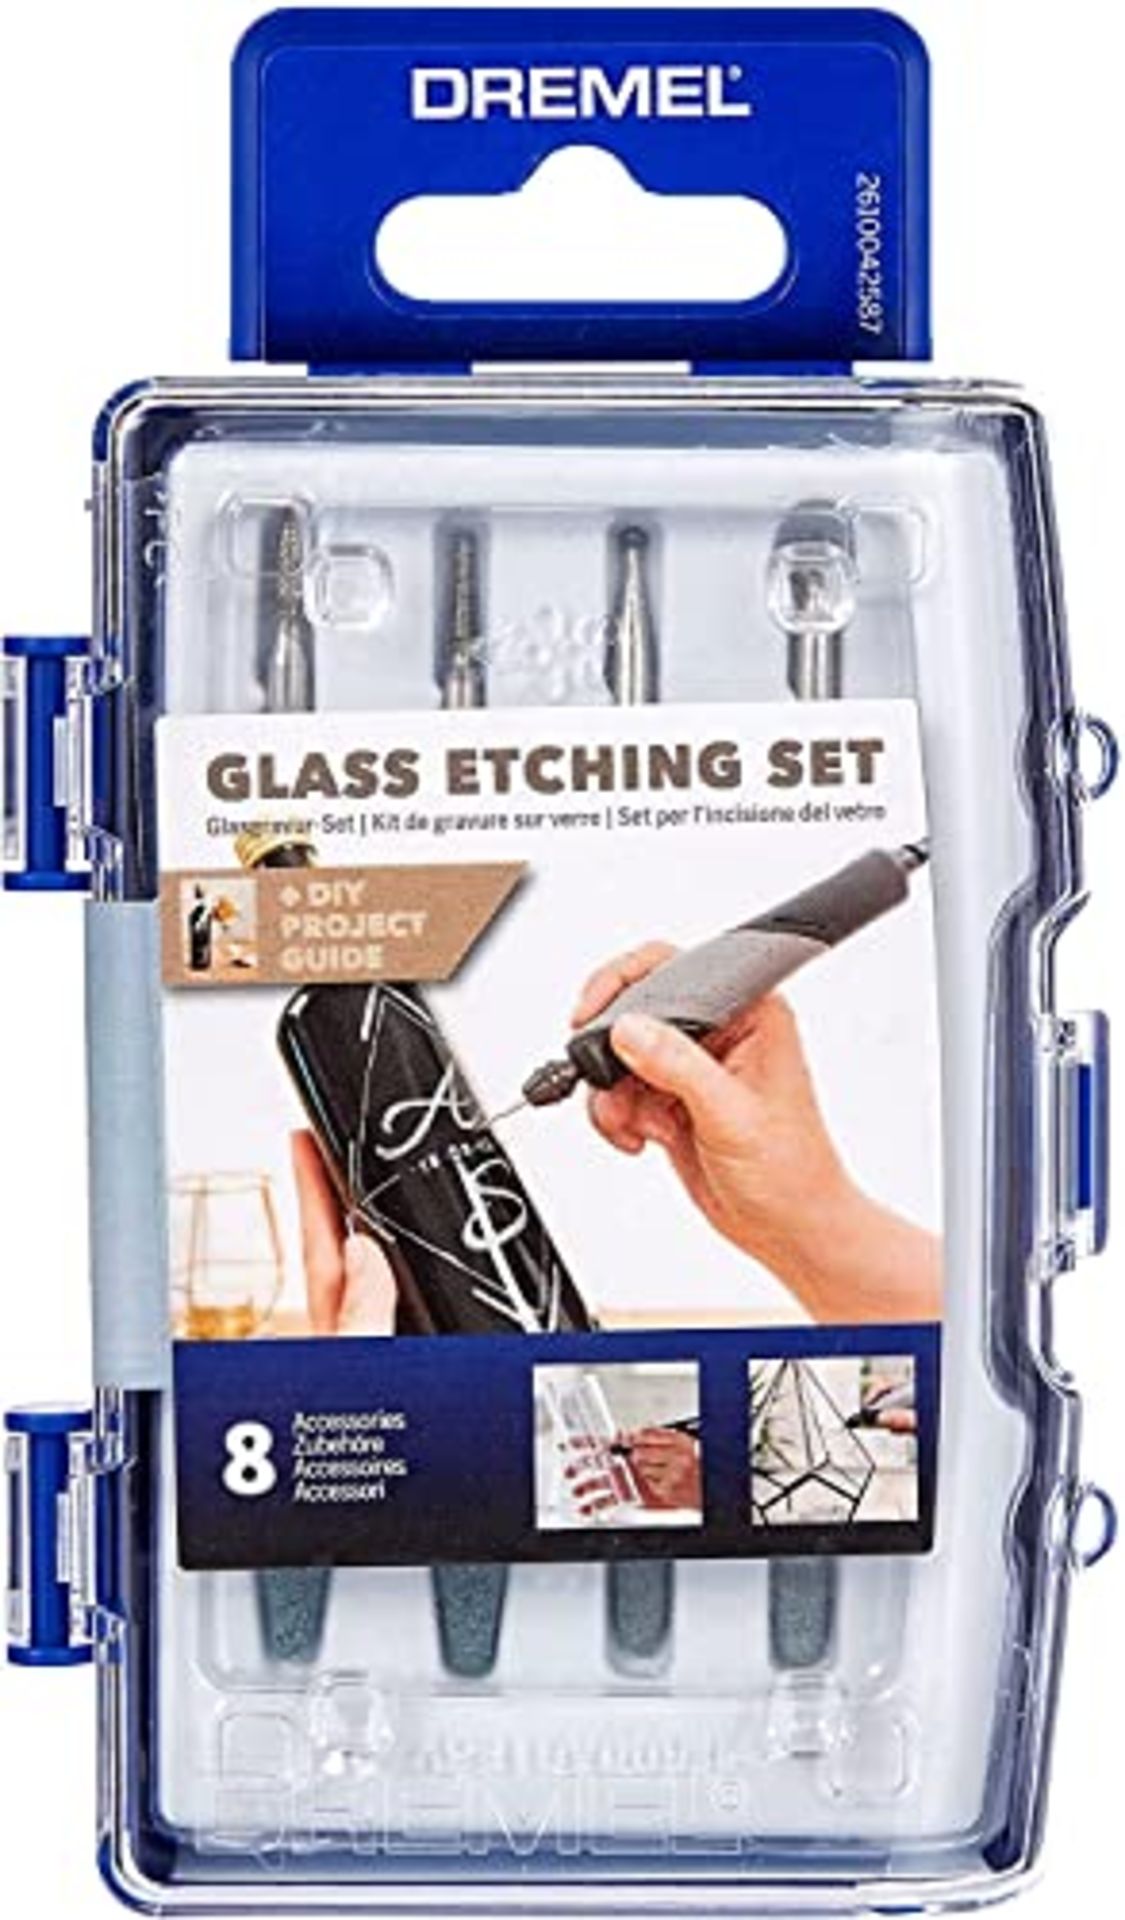 Dremel 682 Glass Etching Set, Accessory Kit with 8 Rotary Tool Accessories for Etching